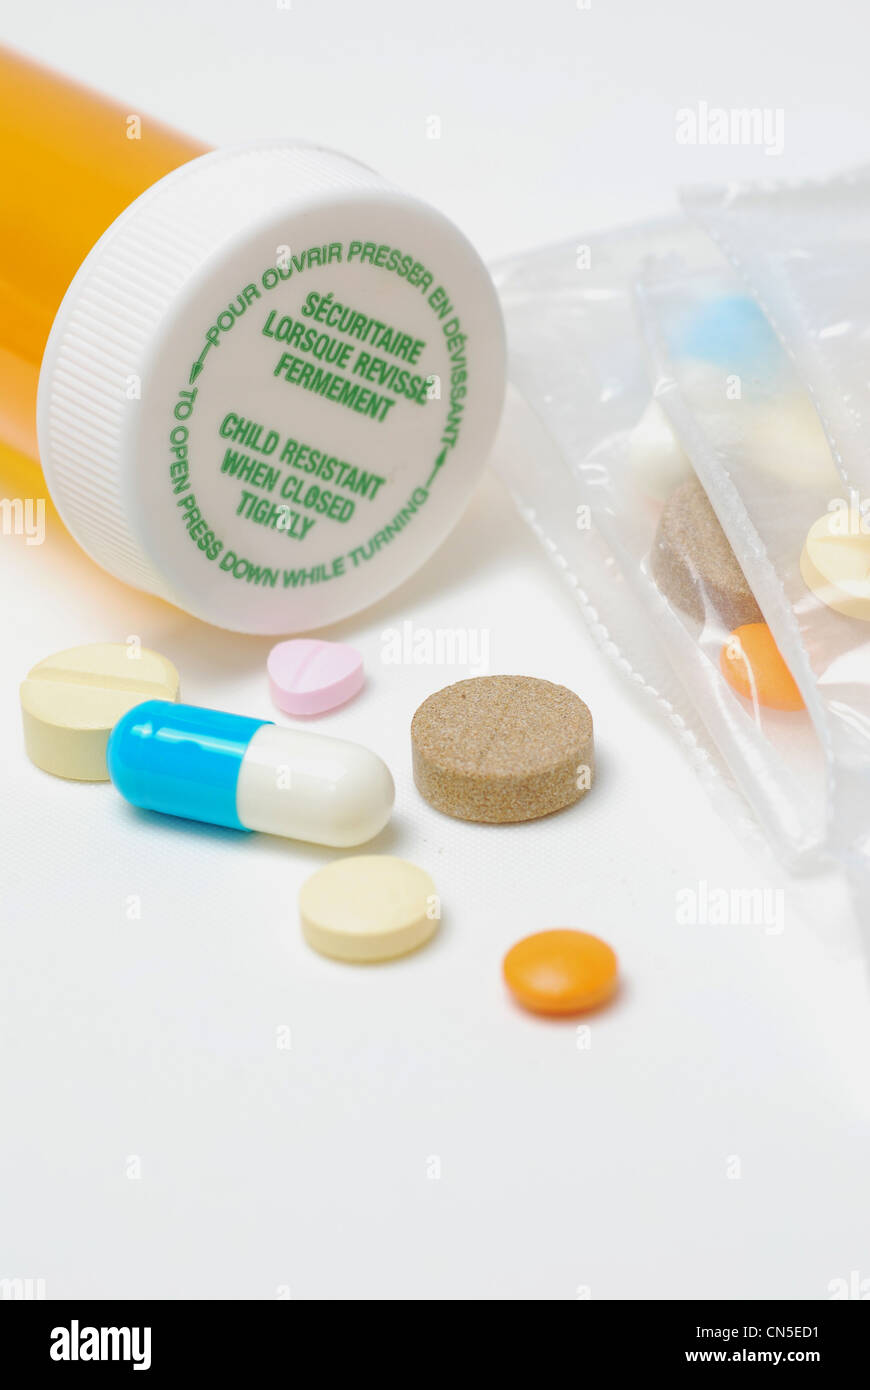 Many Kind of Drugs with Medicine Bottle Stock Photo